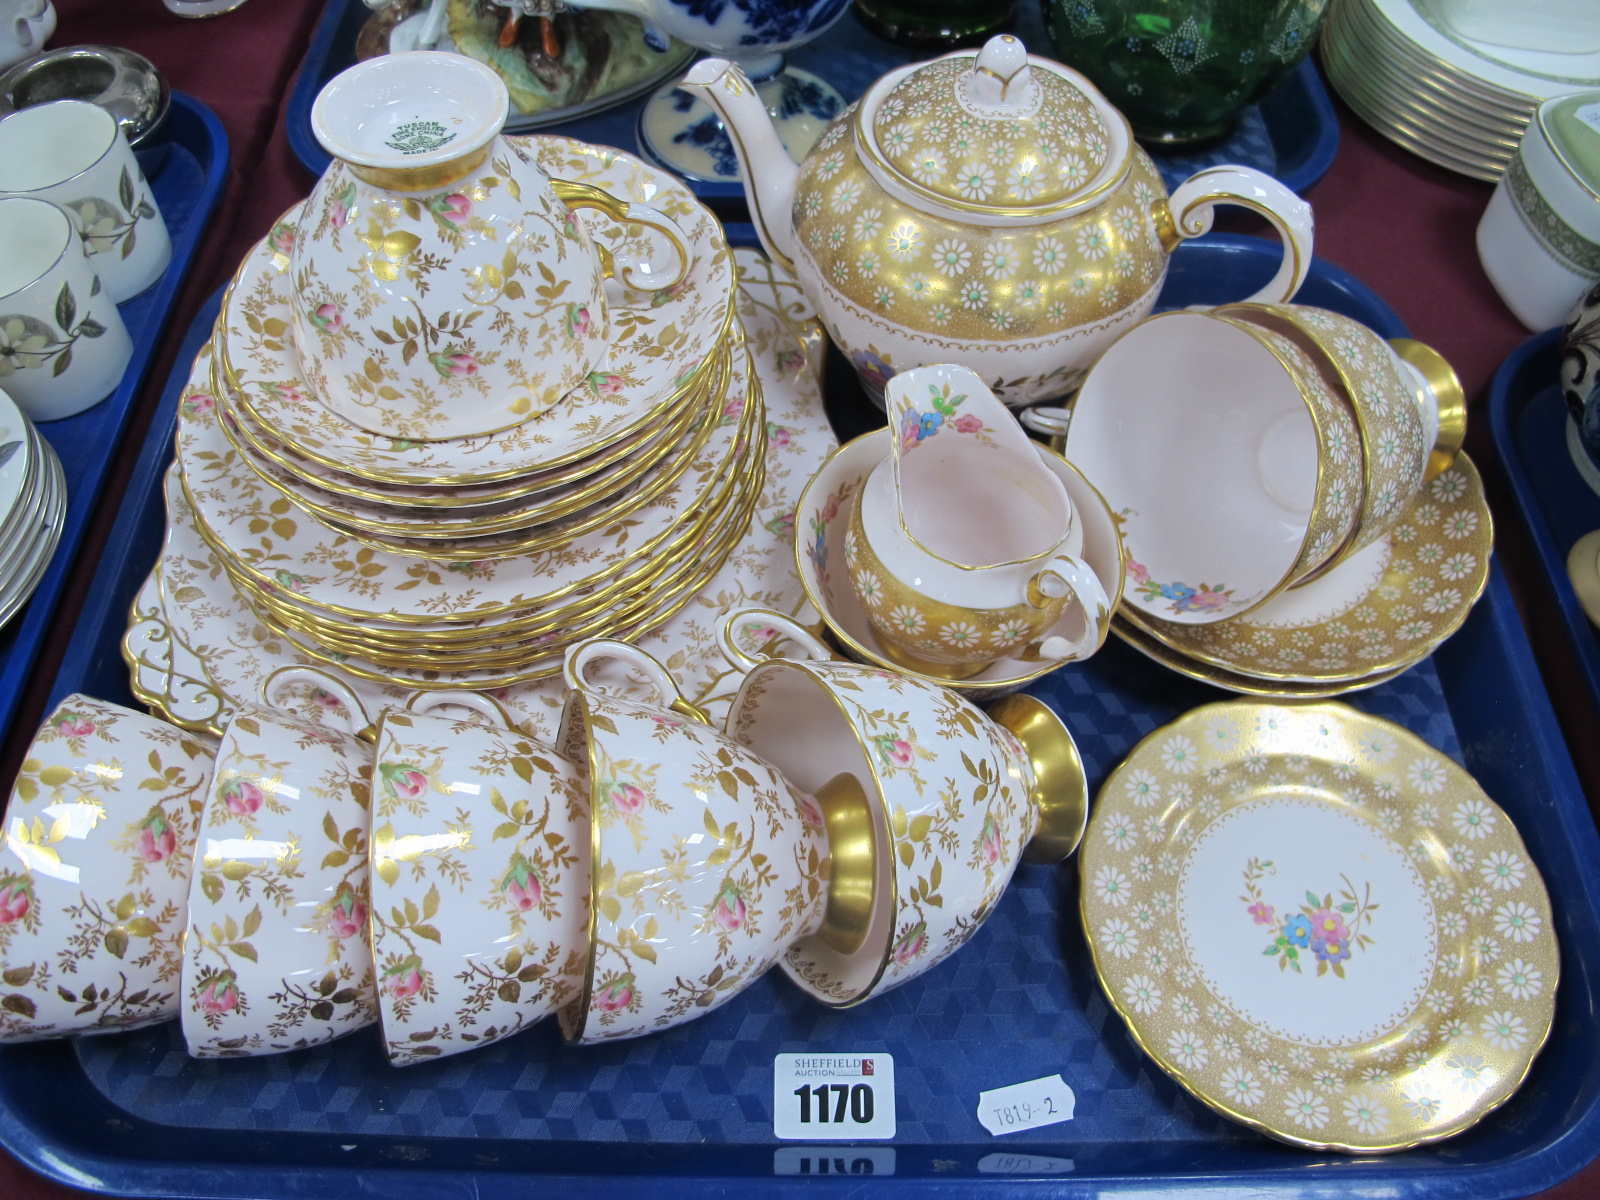 Tuscan Bone China Tea For Two Set, in pink and gilt floral pattern, a Tuscan tea set similar